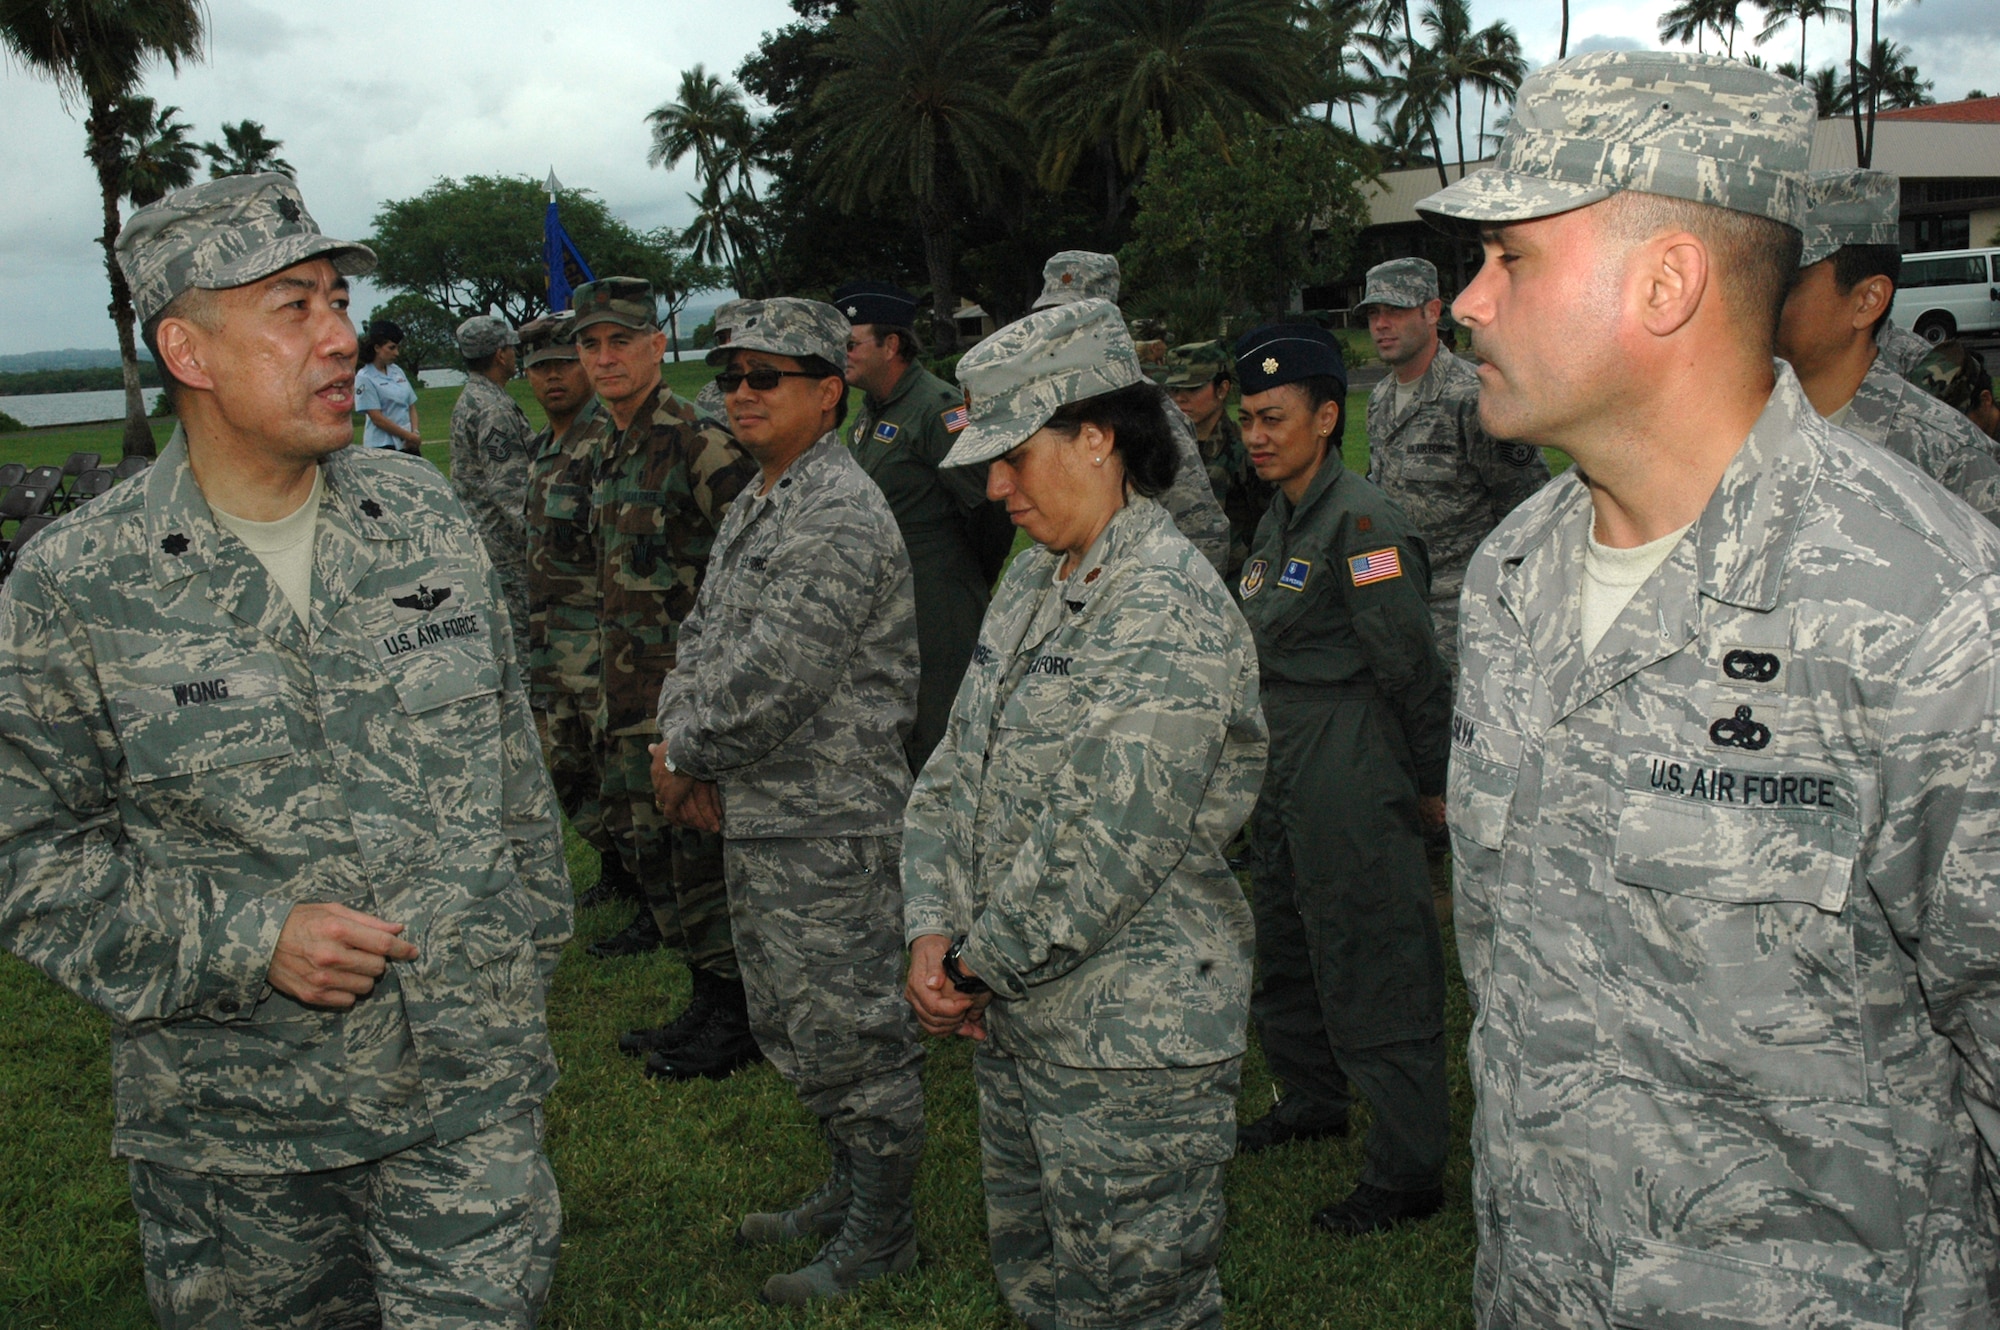 Lt. Col. Deric K. Wong, 624th RSG deputy commander, briefs members of the group prior to the assumption of command ceremony Jan. 10 at Hickam Air Force Base, Hawaii. Col. Robert Huston assumed command of the 624th RSG, which is the largest Air Force Reserve group in the Pacific. Colonel Huston's responsibility as commander of the 624th RSG is managing the largest Air Force Reserve presence in the Pacific, which is comprised of five units in Hawaii and Guam. The group provides the combatant commander more than 650 combat-ready Airmen who specialize in aerial port, aeromedical staging and civil engineering operations for worldwide employment. (Air Force photo/Master Sgt. Daniel Nathaniel)